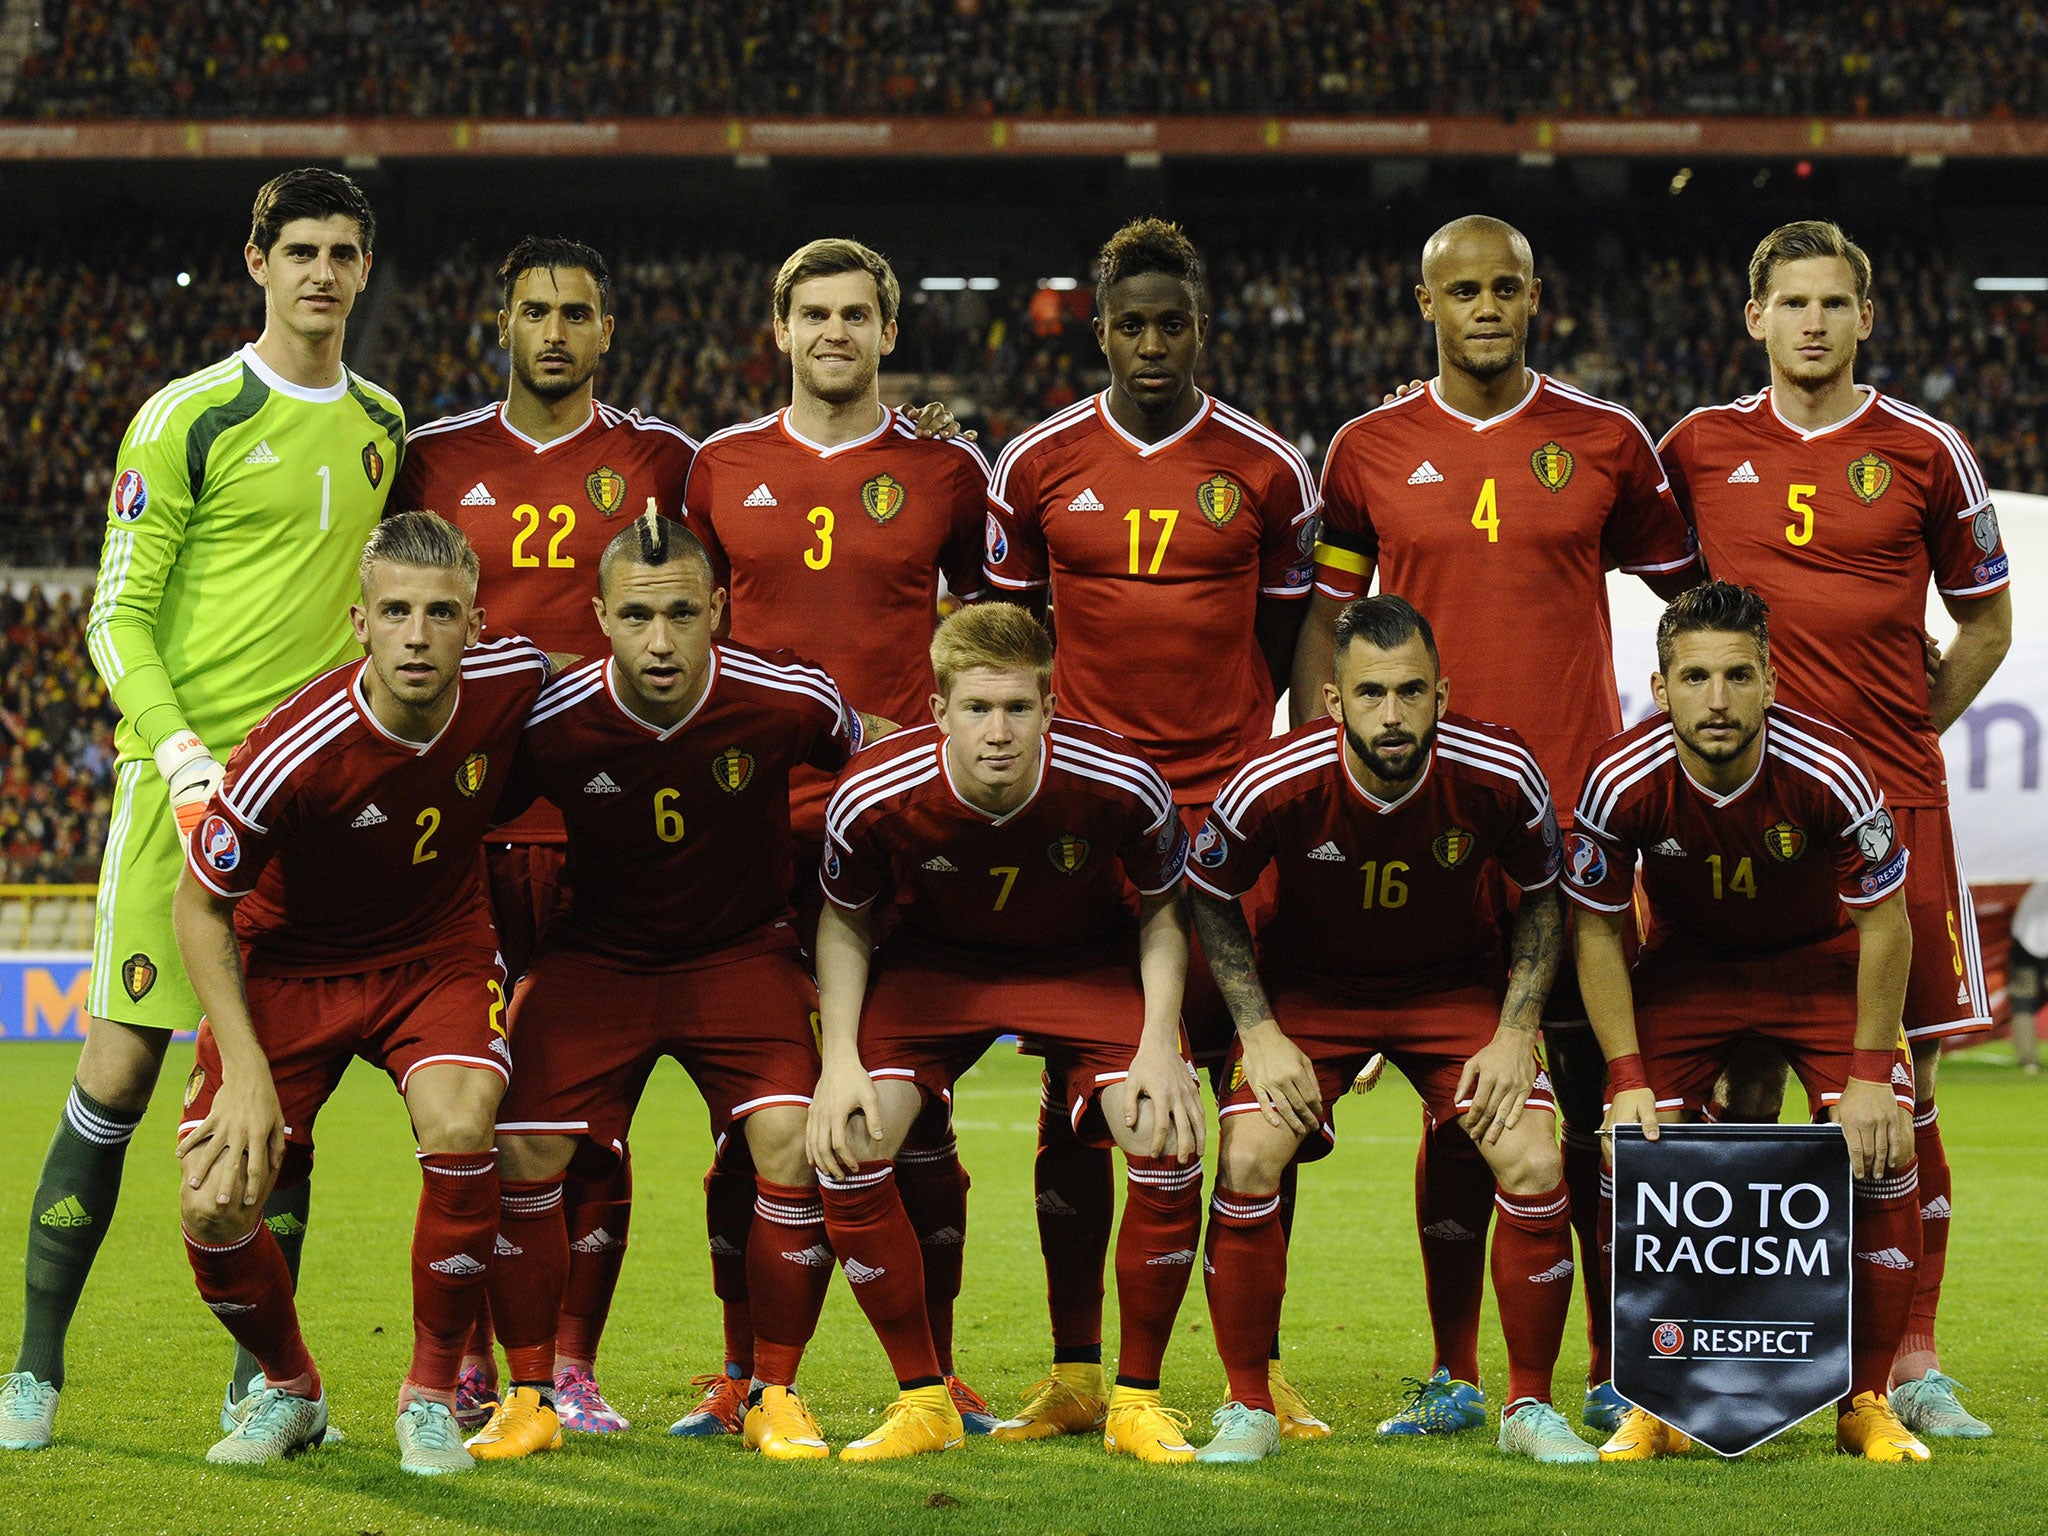 Belgium's match with Spain has been cancelled due to safety fears